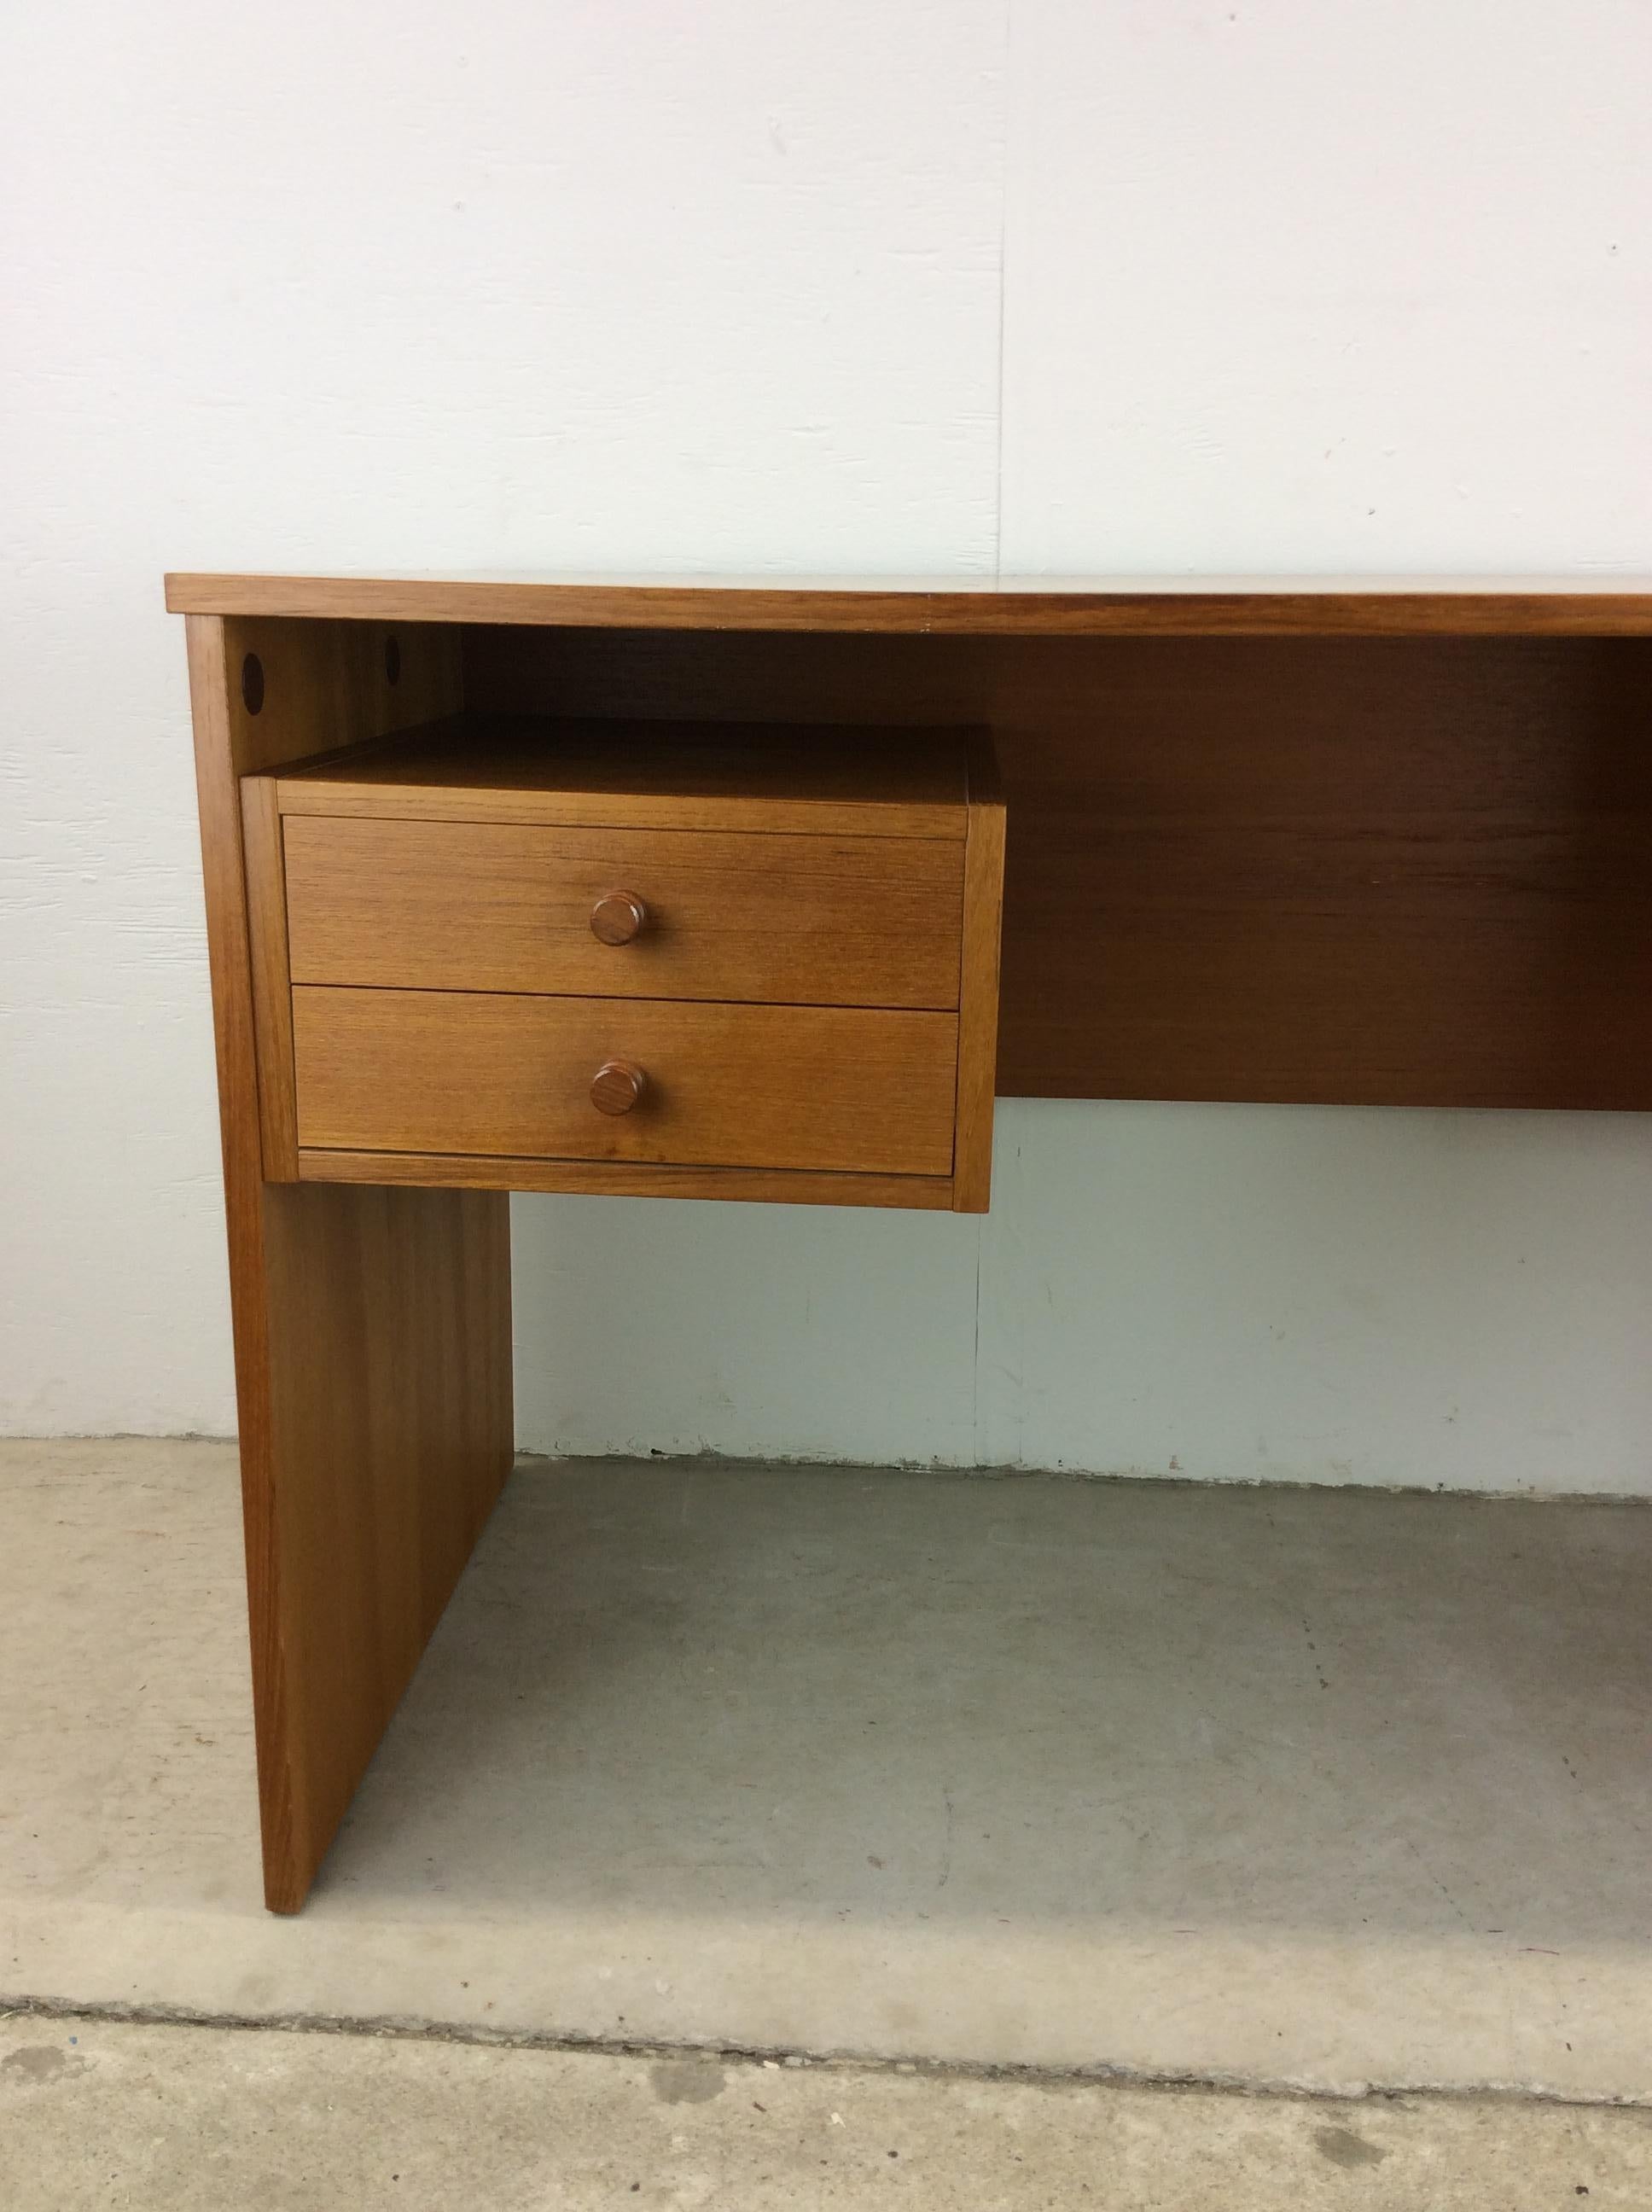 This Danish Modern writing desk features pressed wood construction, teak veneer with original finish, two dovetailed drawers with carved wood pulls, large opened storage shelf, and finished back.

Check out our other Danish Modern listings for